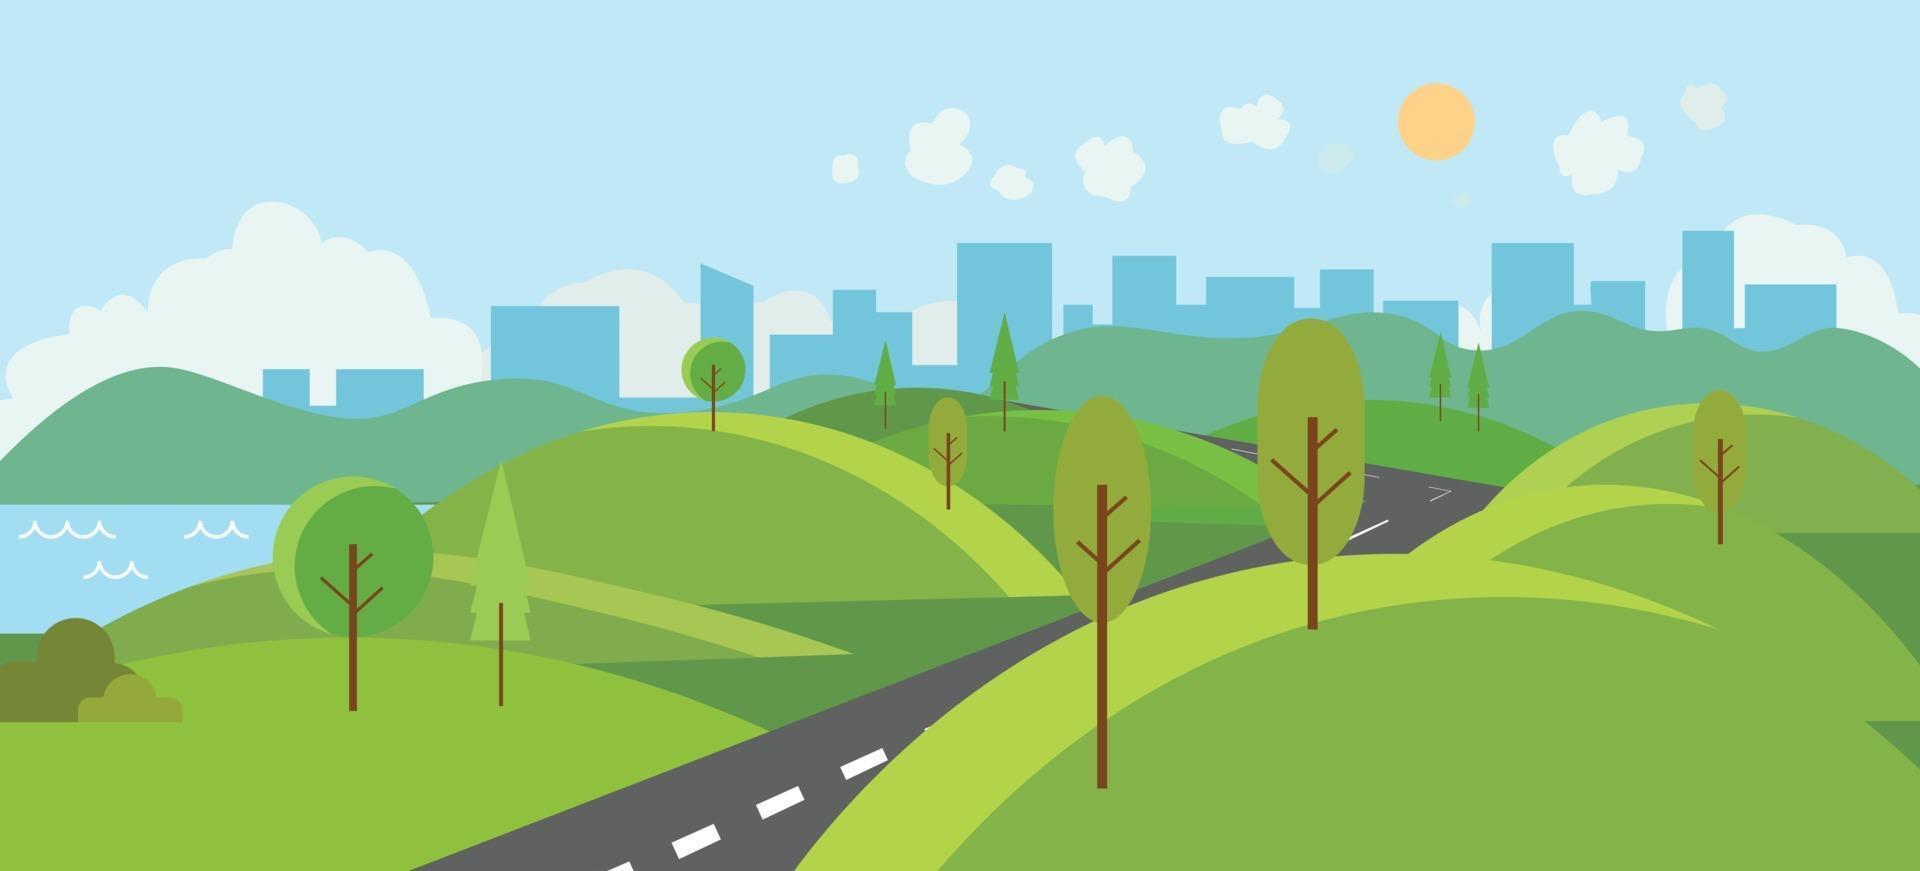 Public park with river and road to city.Vector illustration.Cartoon nature scene with hills and trees.Nature landscape with urban with sky background vector